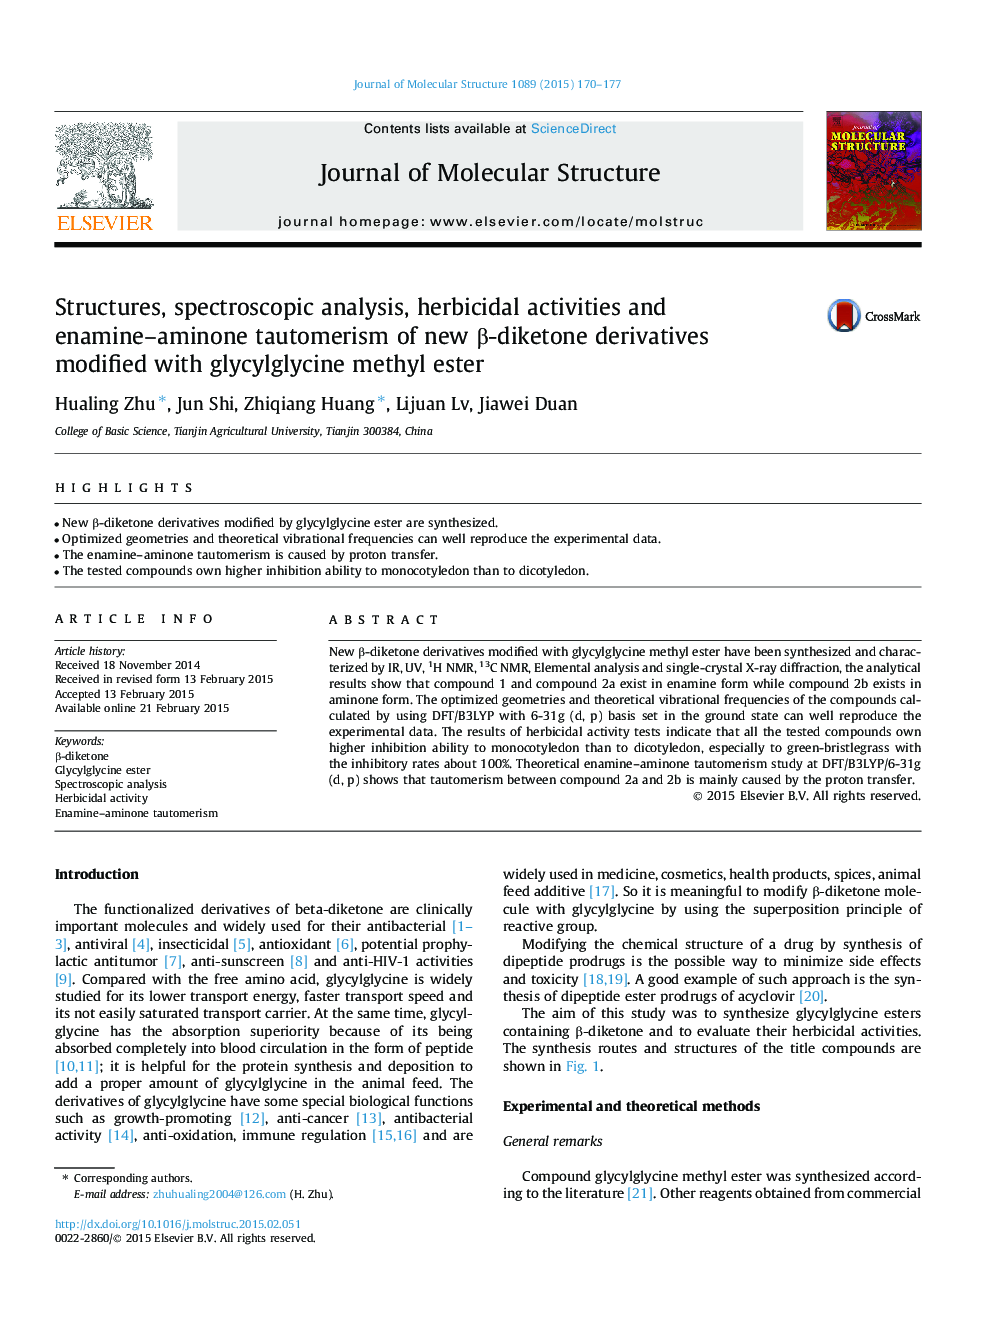 Structures, spectroscopic analysis, herbicidal activities and enamine–aminone tautomerism of new β-diketone derivatives modified with glycylglycine methyl ester